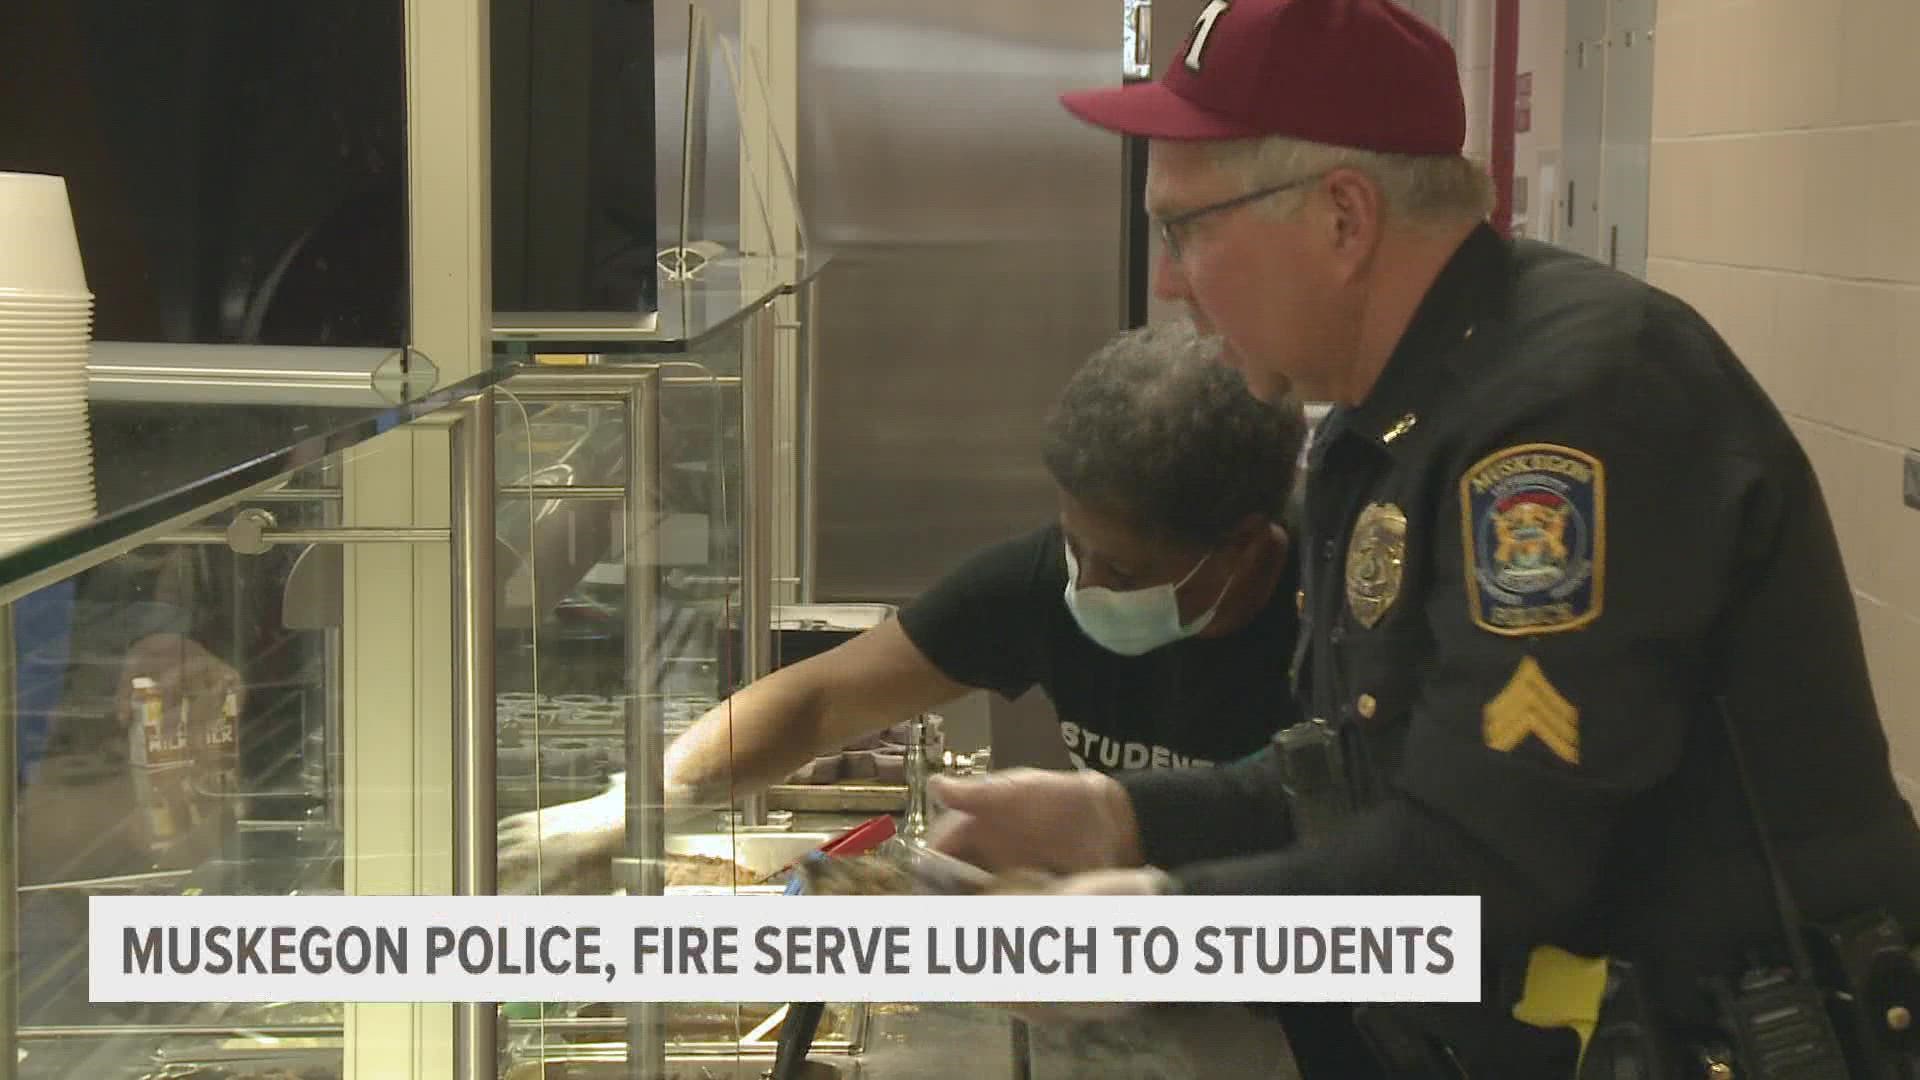 Their goal is to build positive connections between the public safety departments and the students.